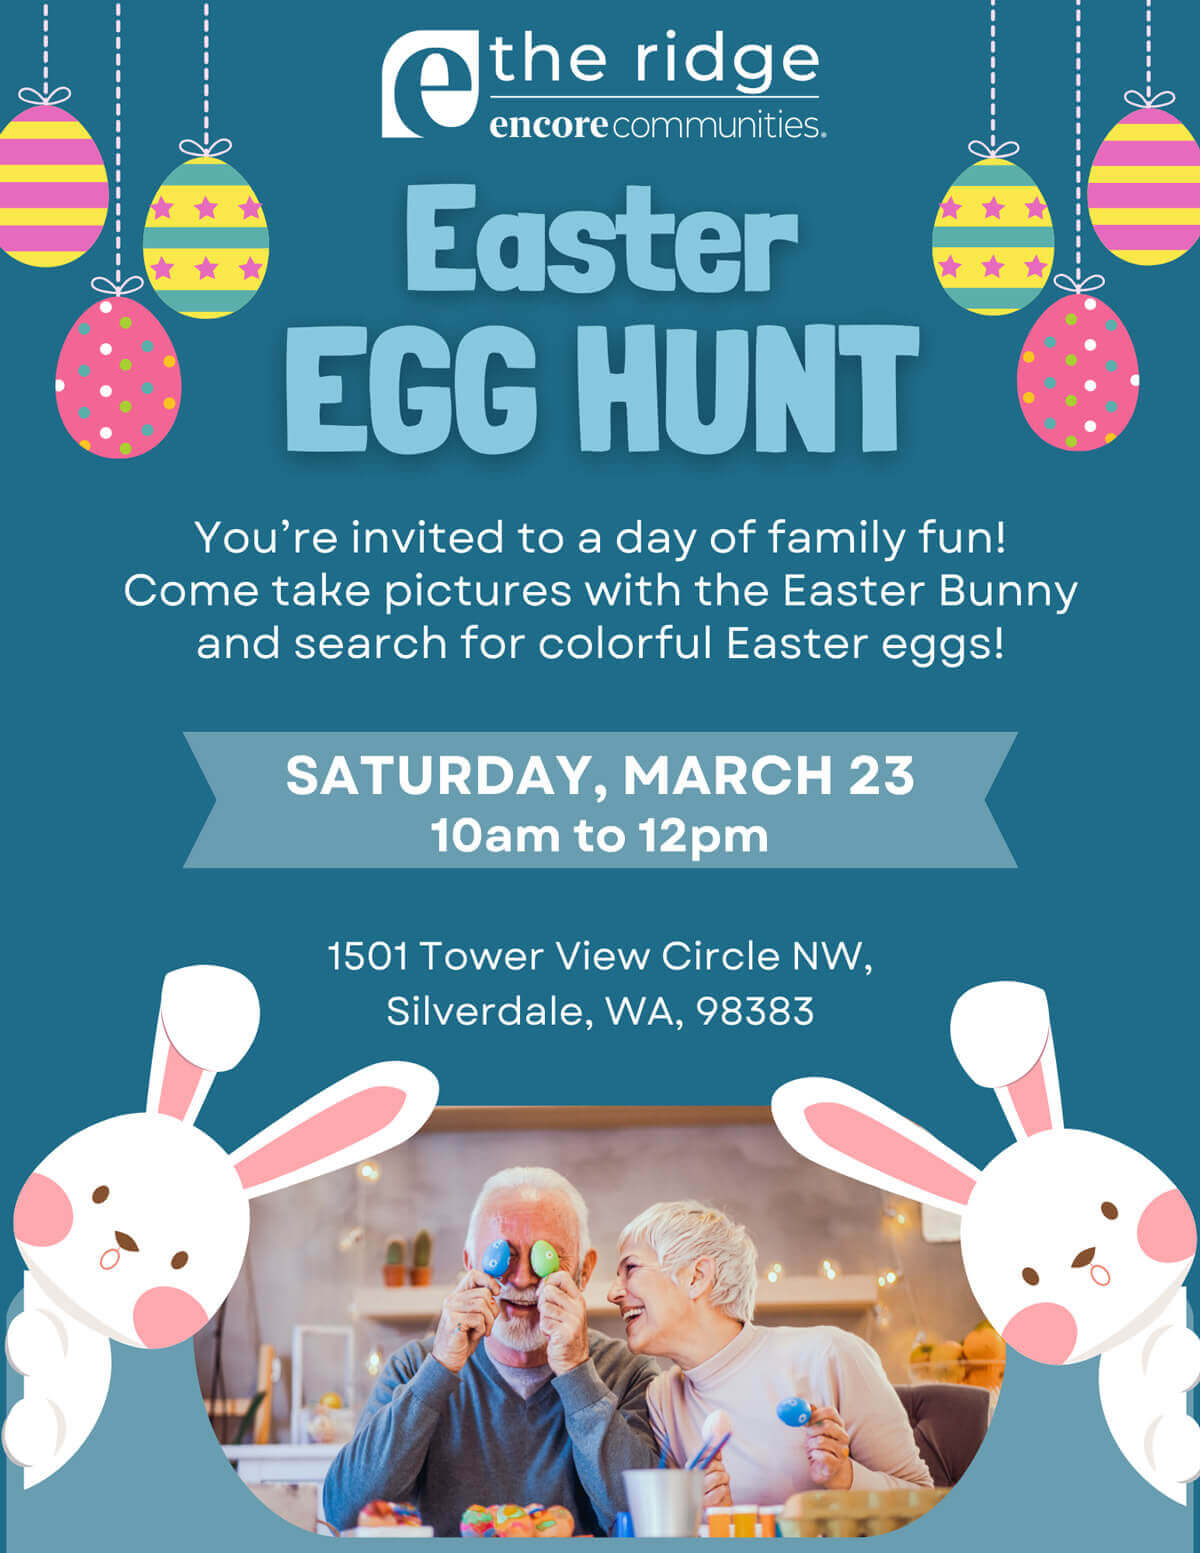 Easter Egg Hunt: You're invited to a day of family fun! Come take pictures with the Easter Bunny and search for colorful Easter eggs!